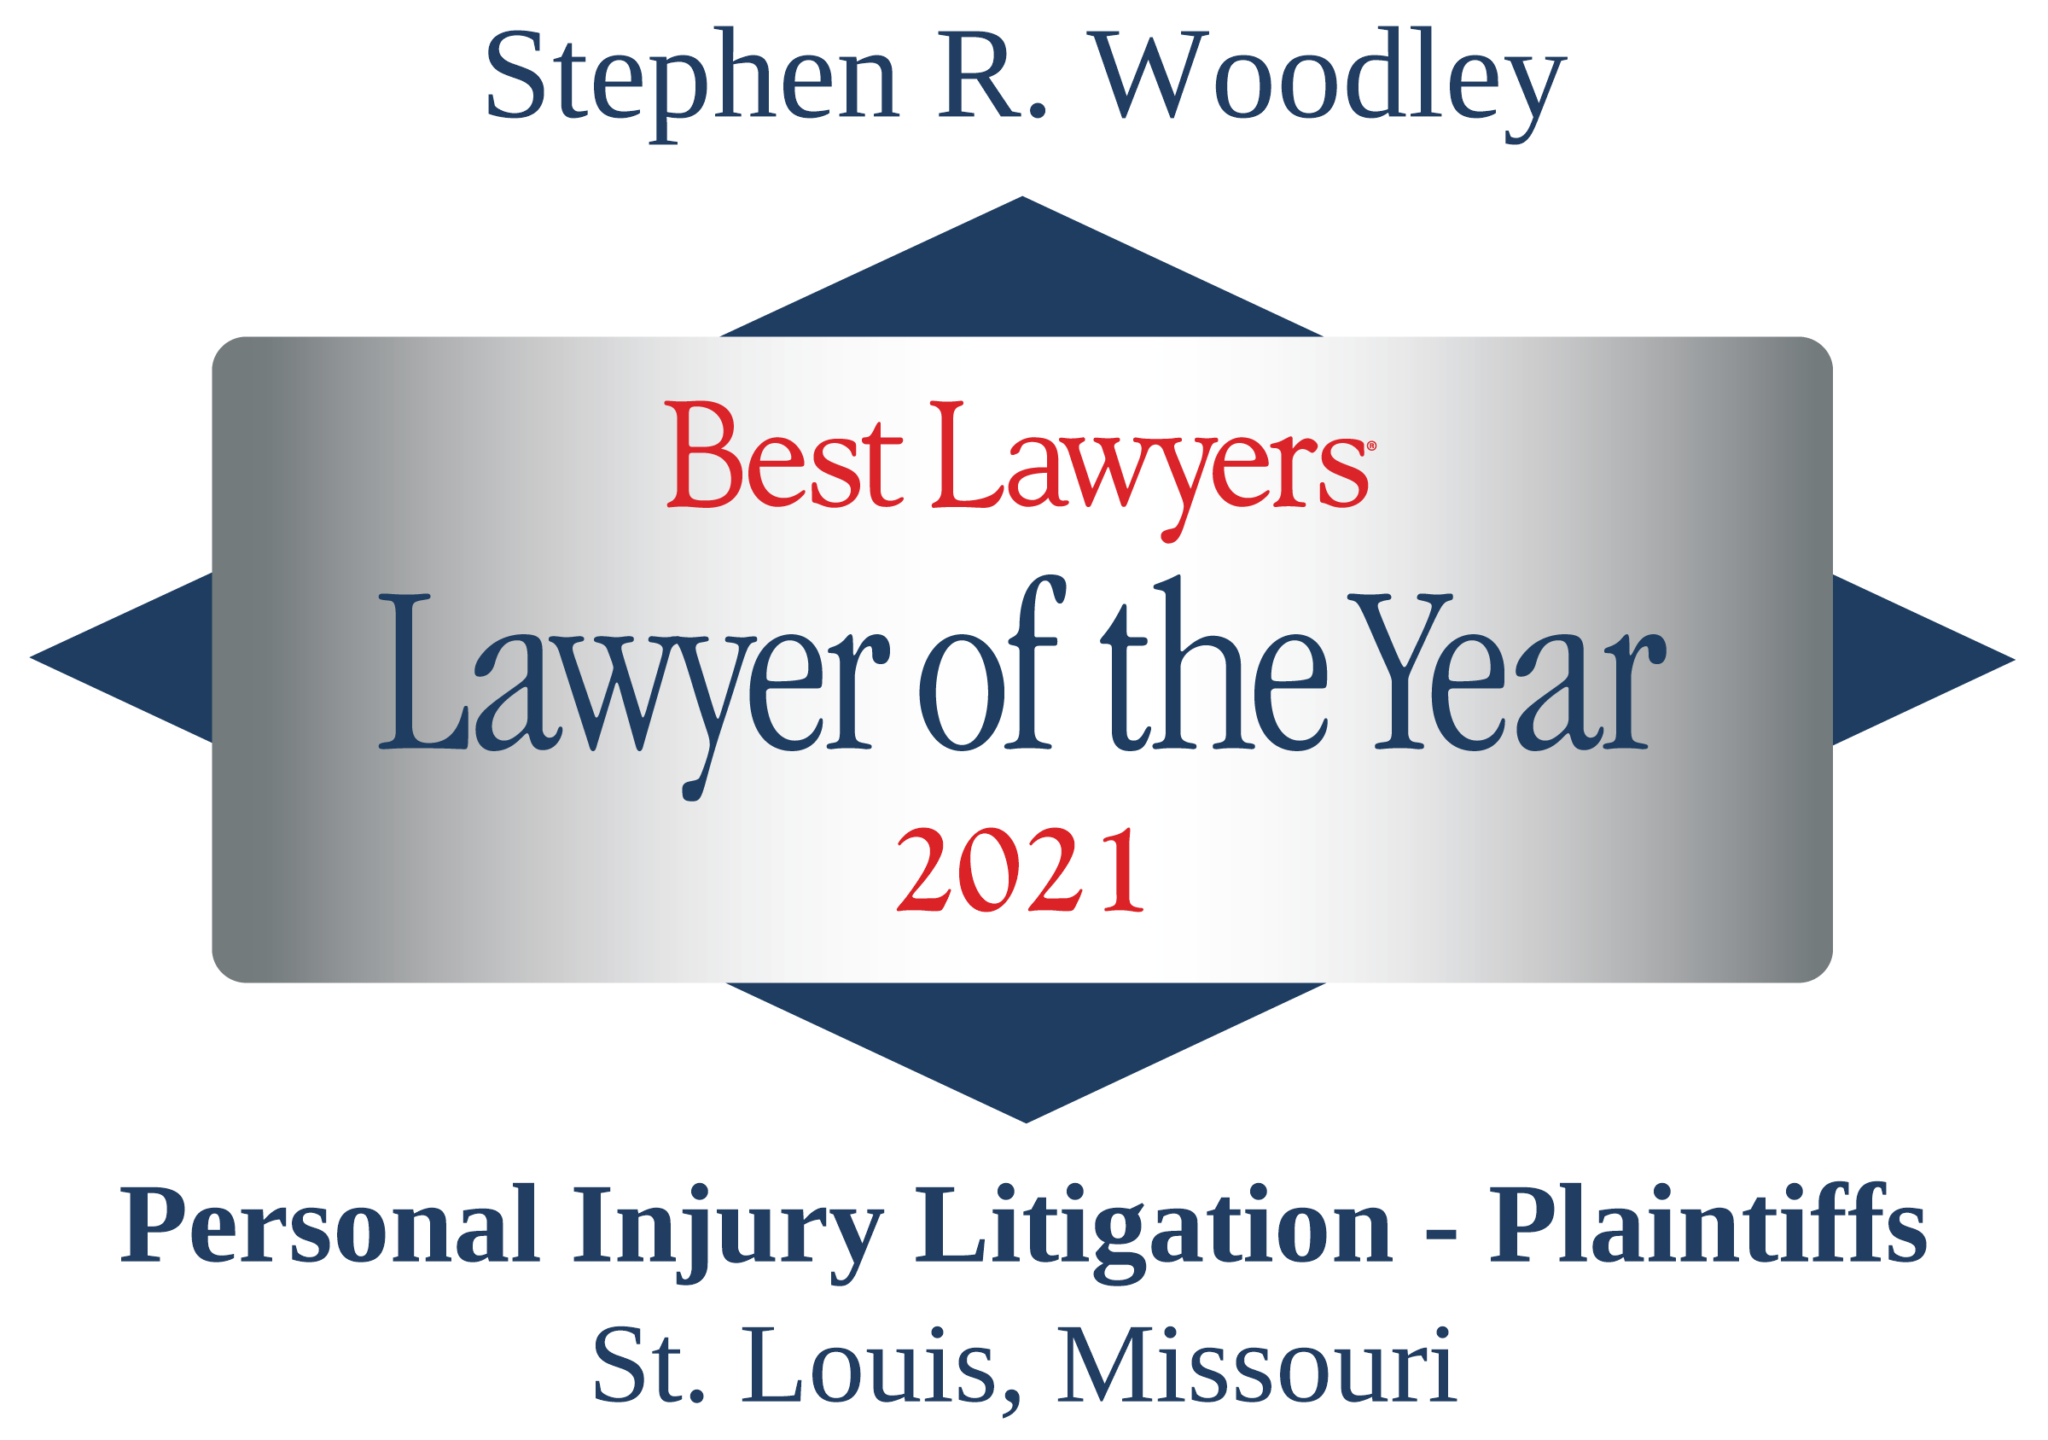 Stephen Woodley Lawyer of the Year 2021 badge